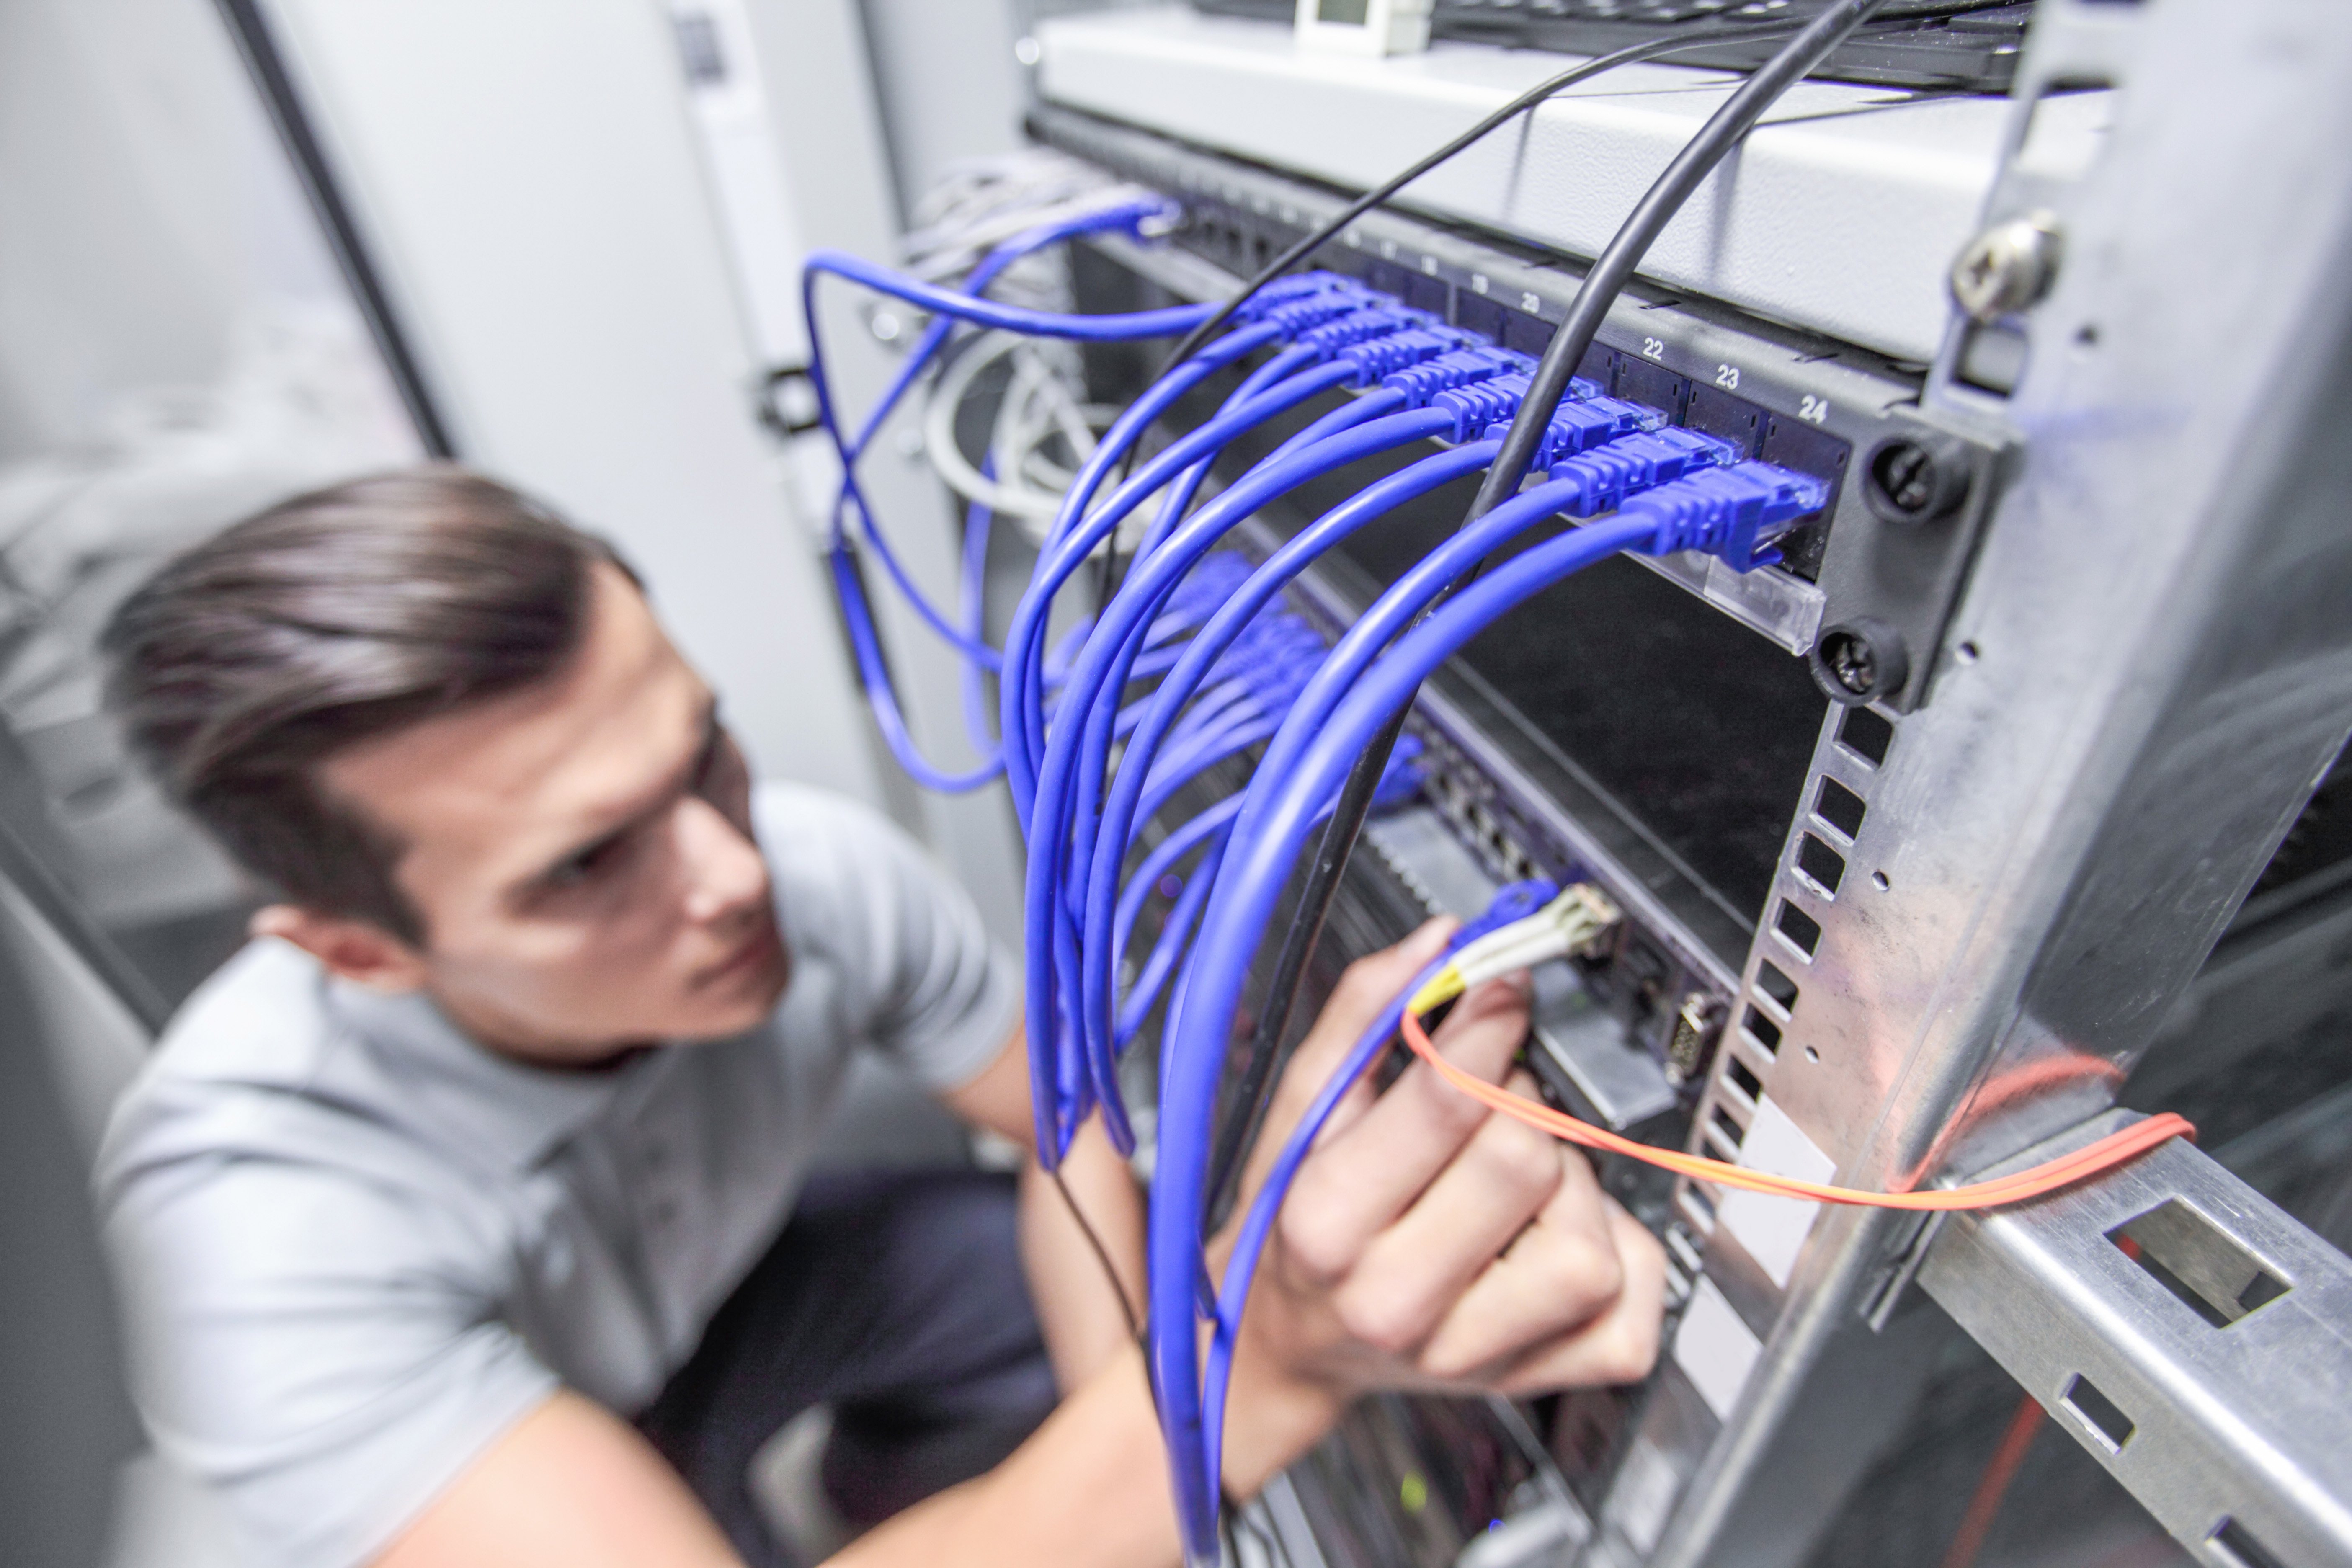 Network technician connecting cables in server room